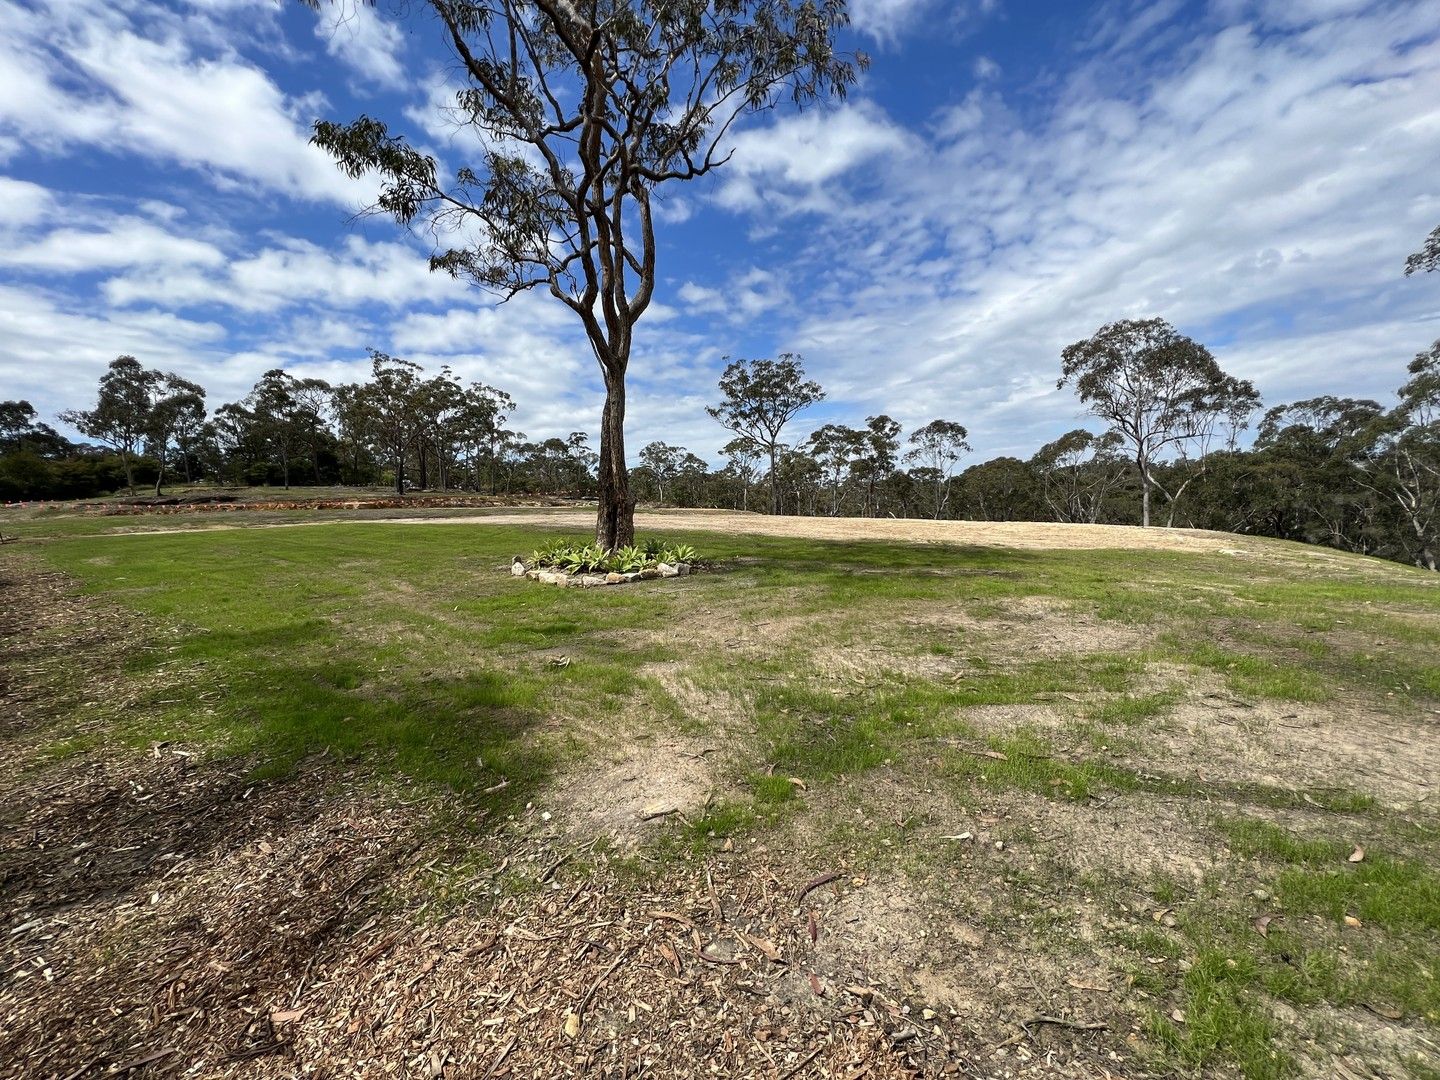 Lot 11 DP 585842 Charcoal Rd, South Maroota NSW 2756, Image 0